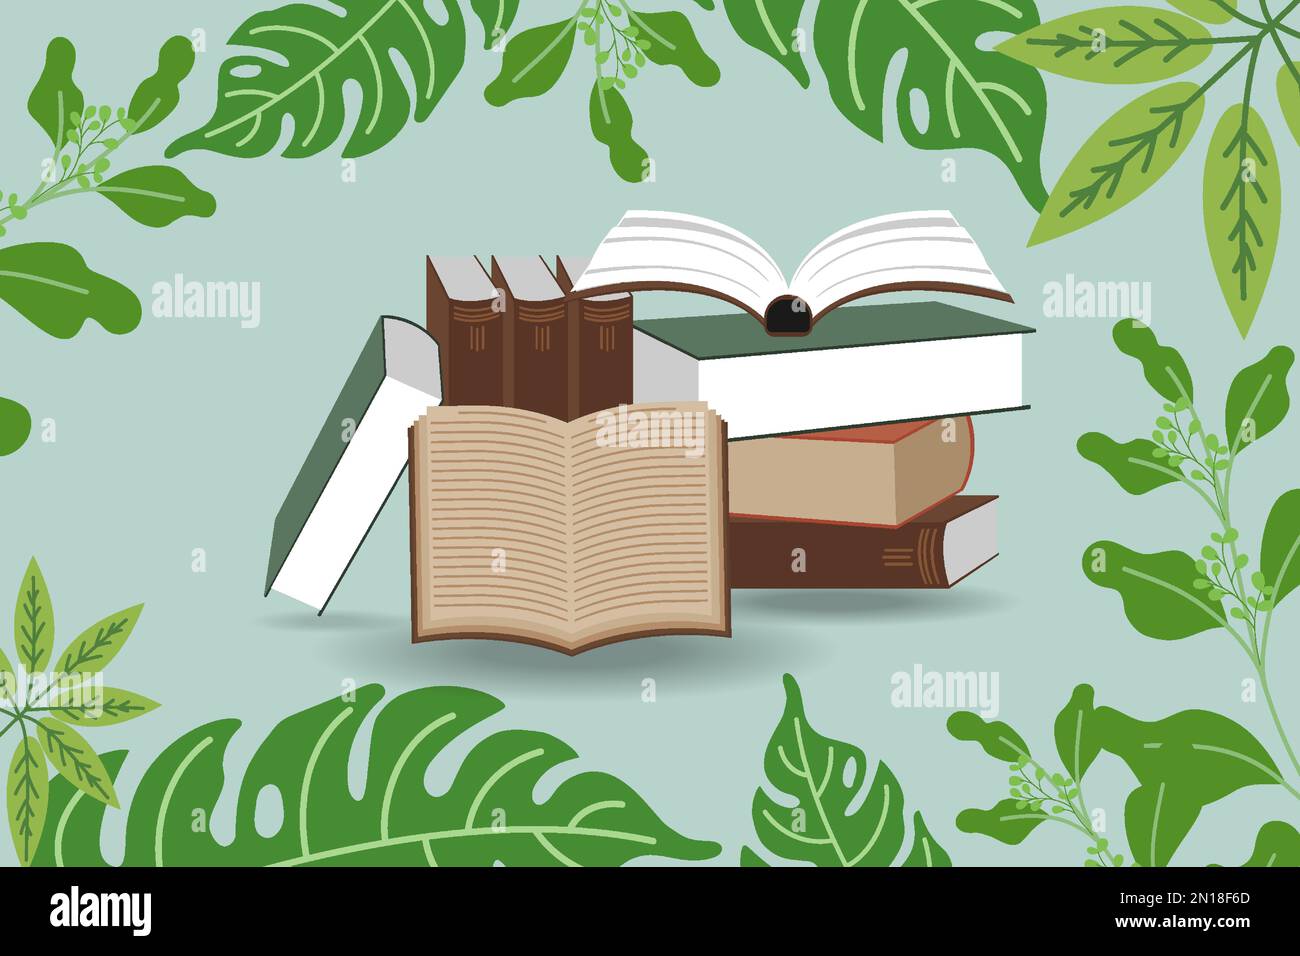 https://c8.alamy.com/comp/2N18F6D/illustration-of-pile-of-books-to-read-world-book-day-stack-of-various-textbooks-in-hardcover-open-notebooks-on-light-green-background-literature-e-2N18F6D.jpg